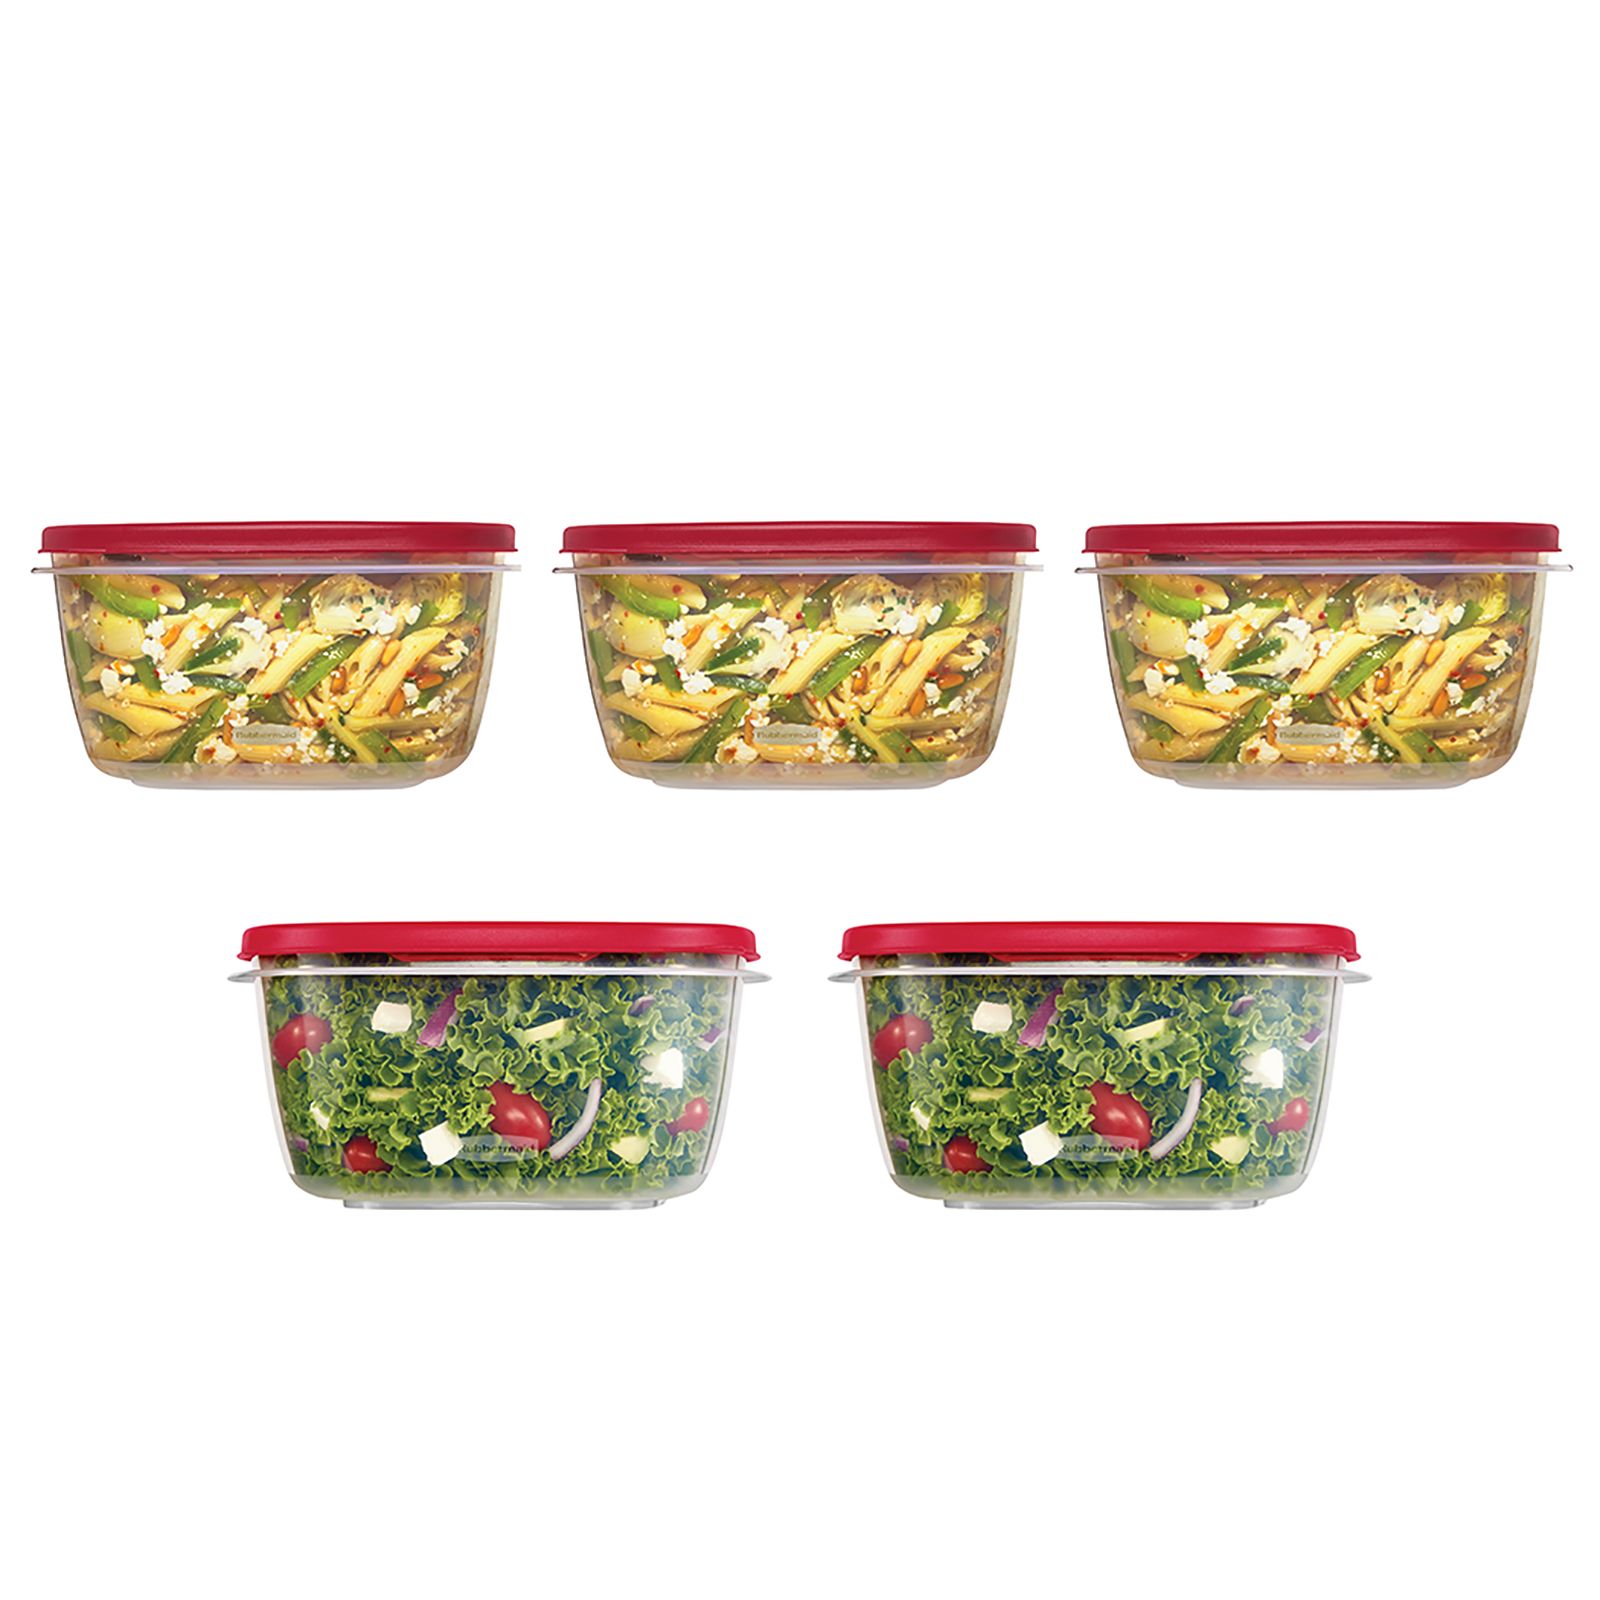 Rubbermaid Easy Find Lids Container & Lid 9 & 14 Cup Value Pack